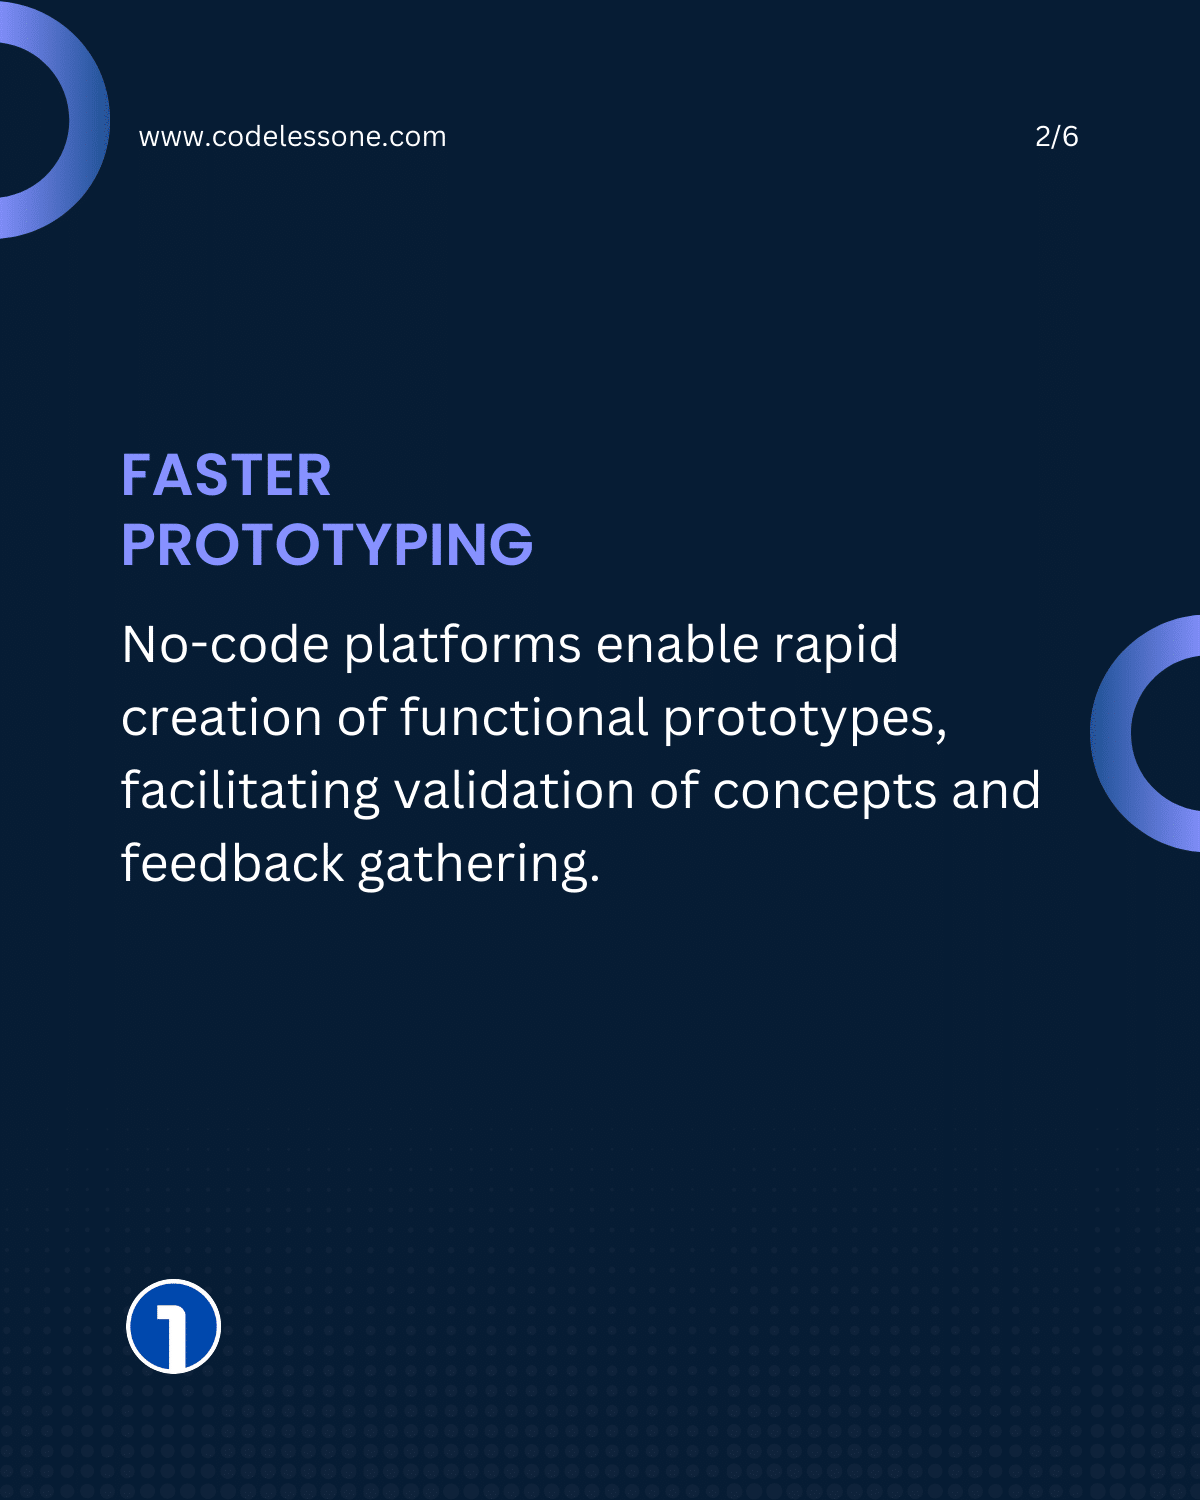 Reason 1 - Faster Prototyping